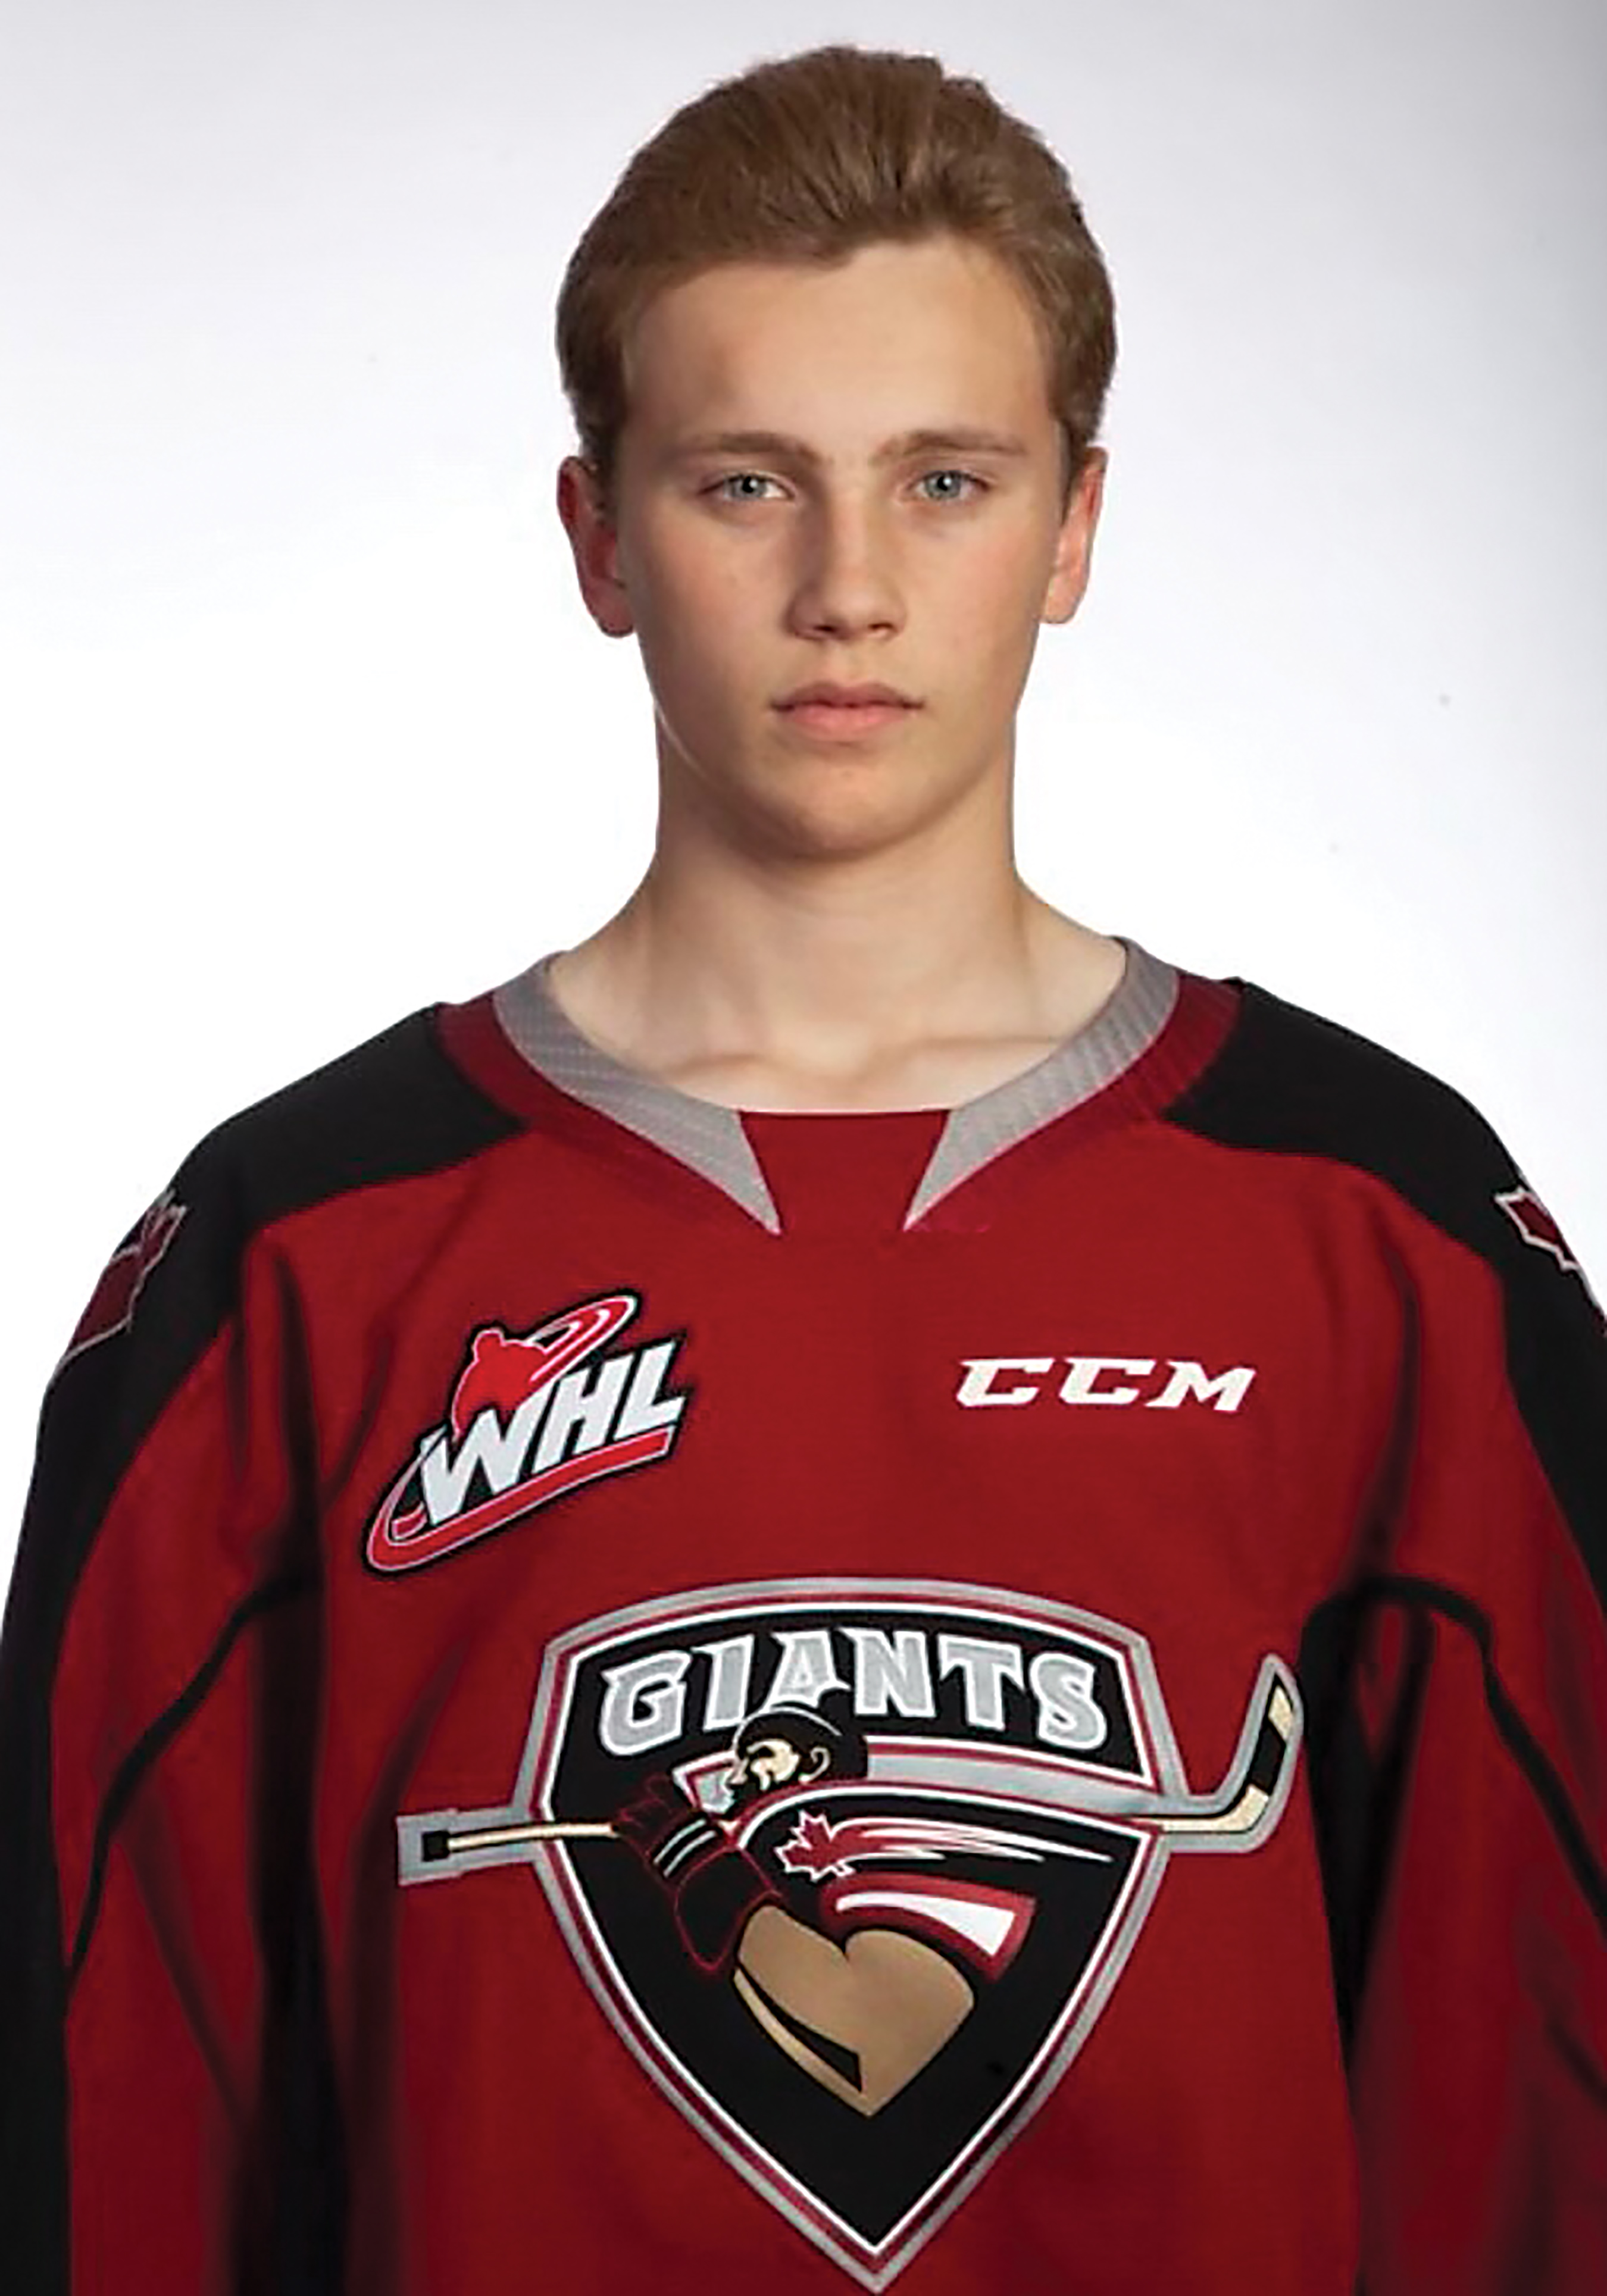 Kyle Bocheck in his<br />
Vancouver Giants jersey.